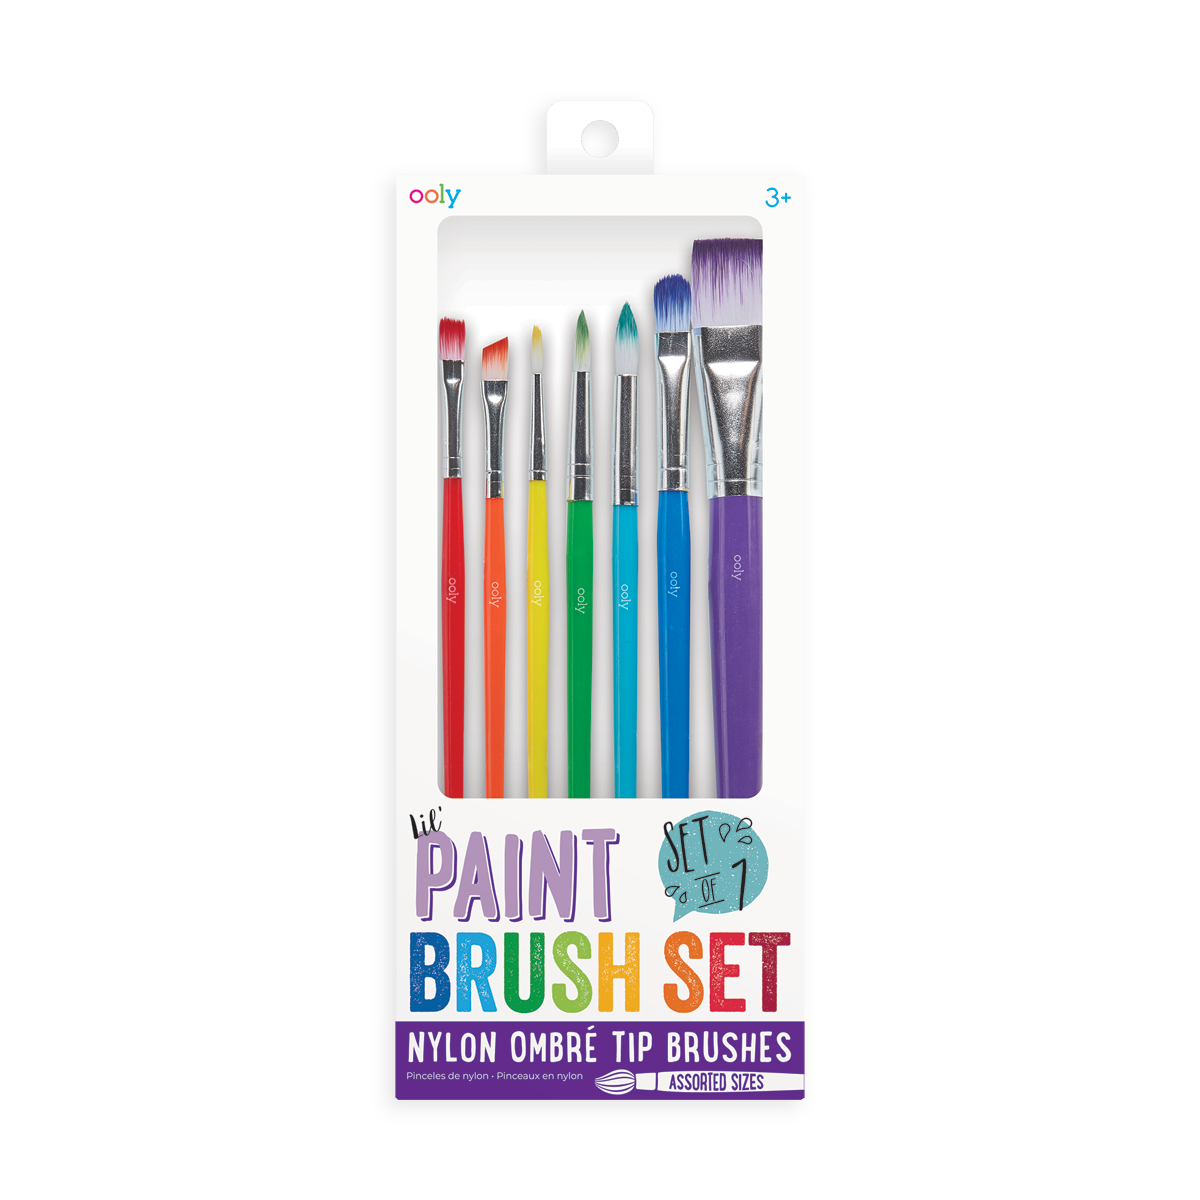 OOLY set of 7 paint brush in assorted sizes new packaging.